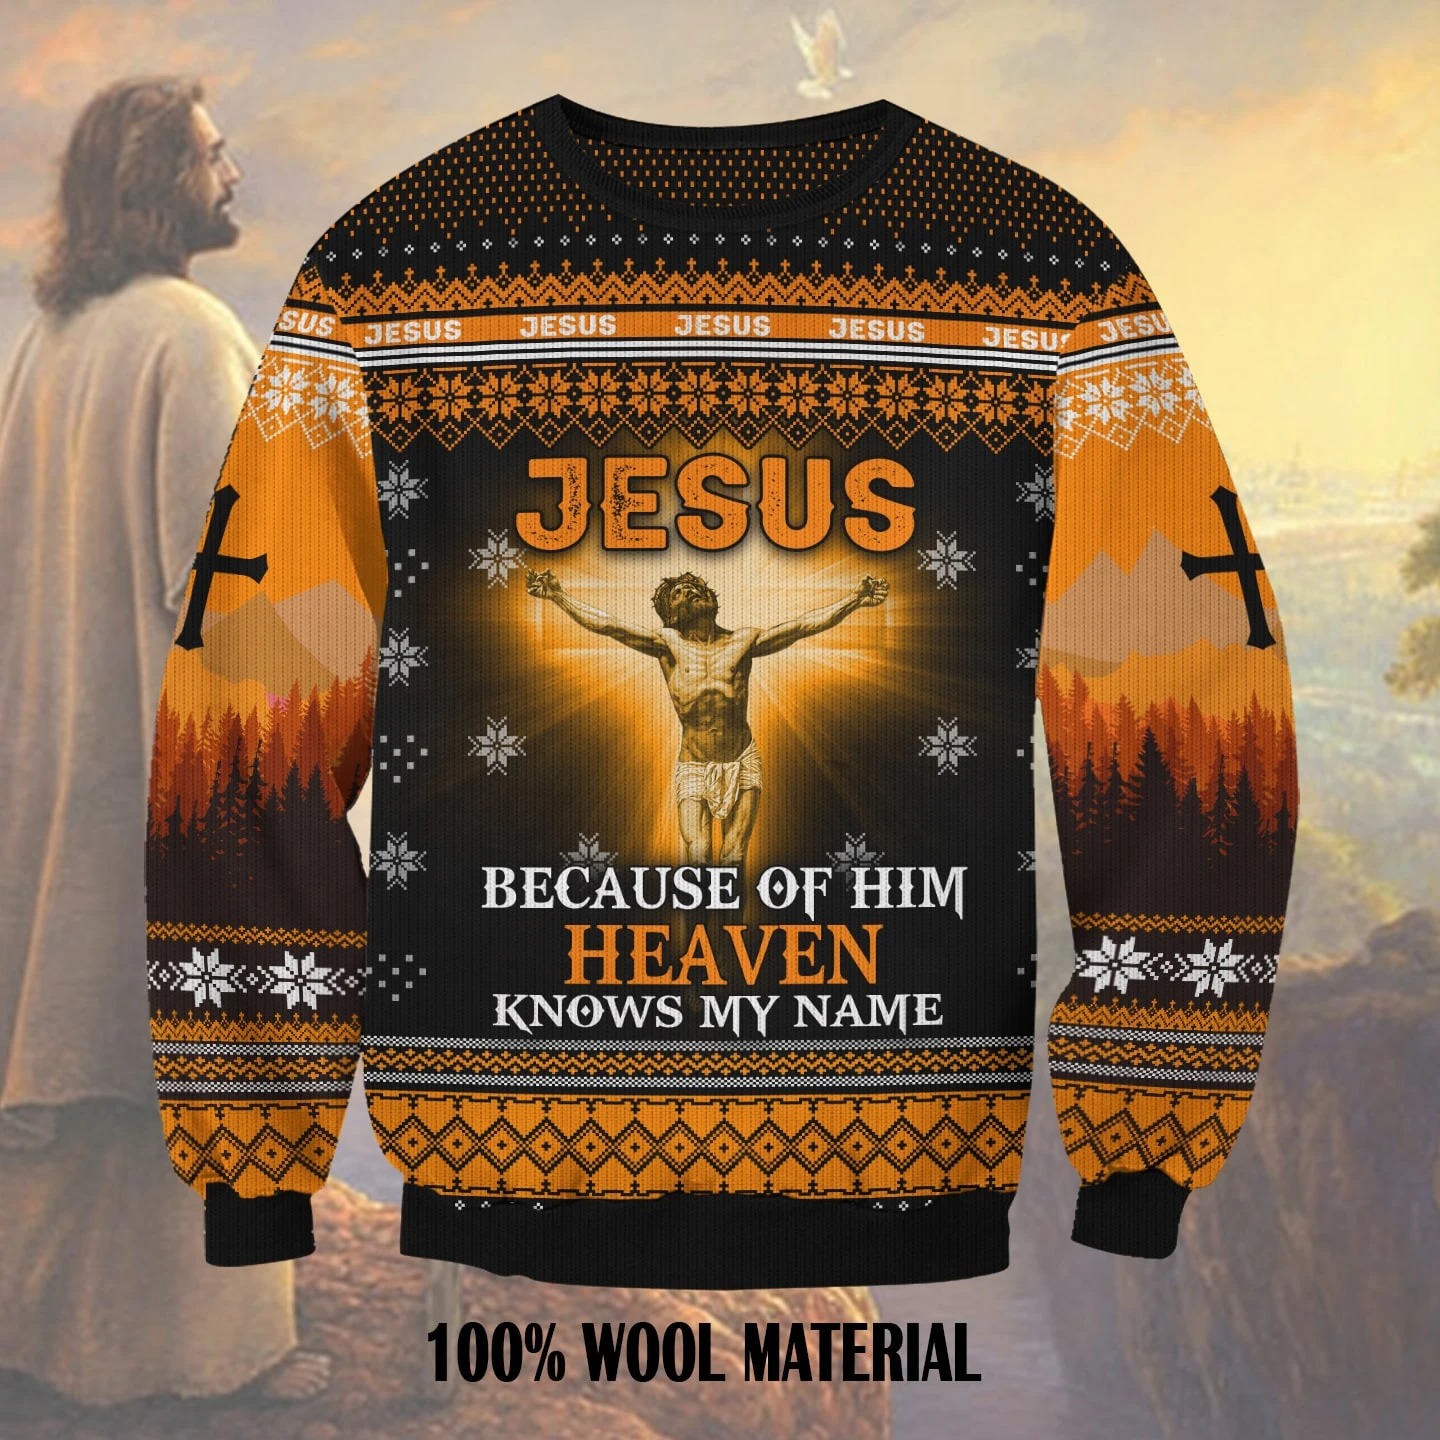 JESUS BECAUSE OF HIM HEAVEN KNOWS MY NAME SWEATER